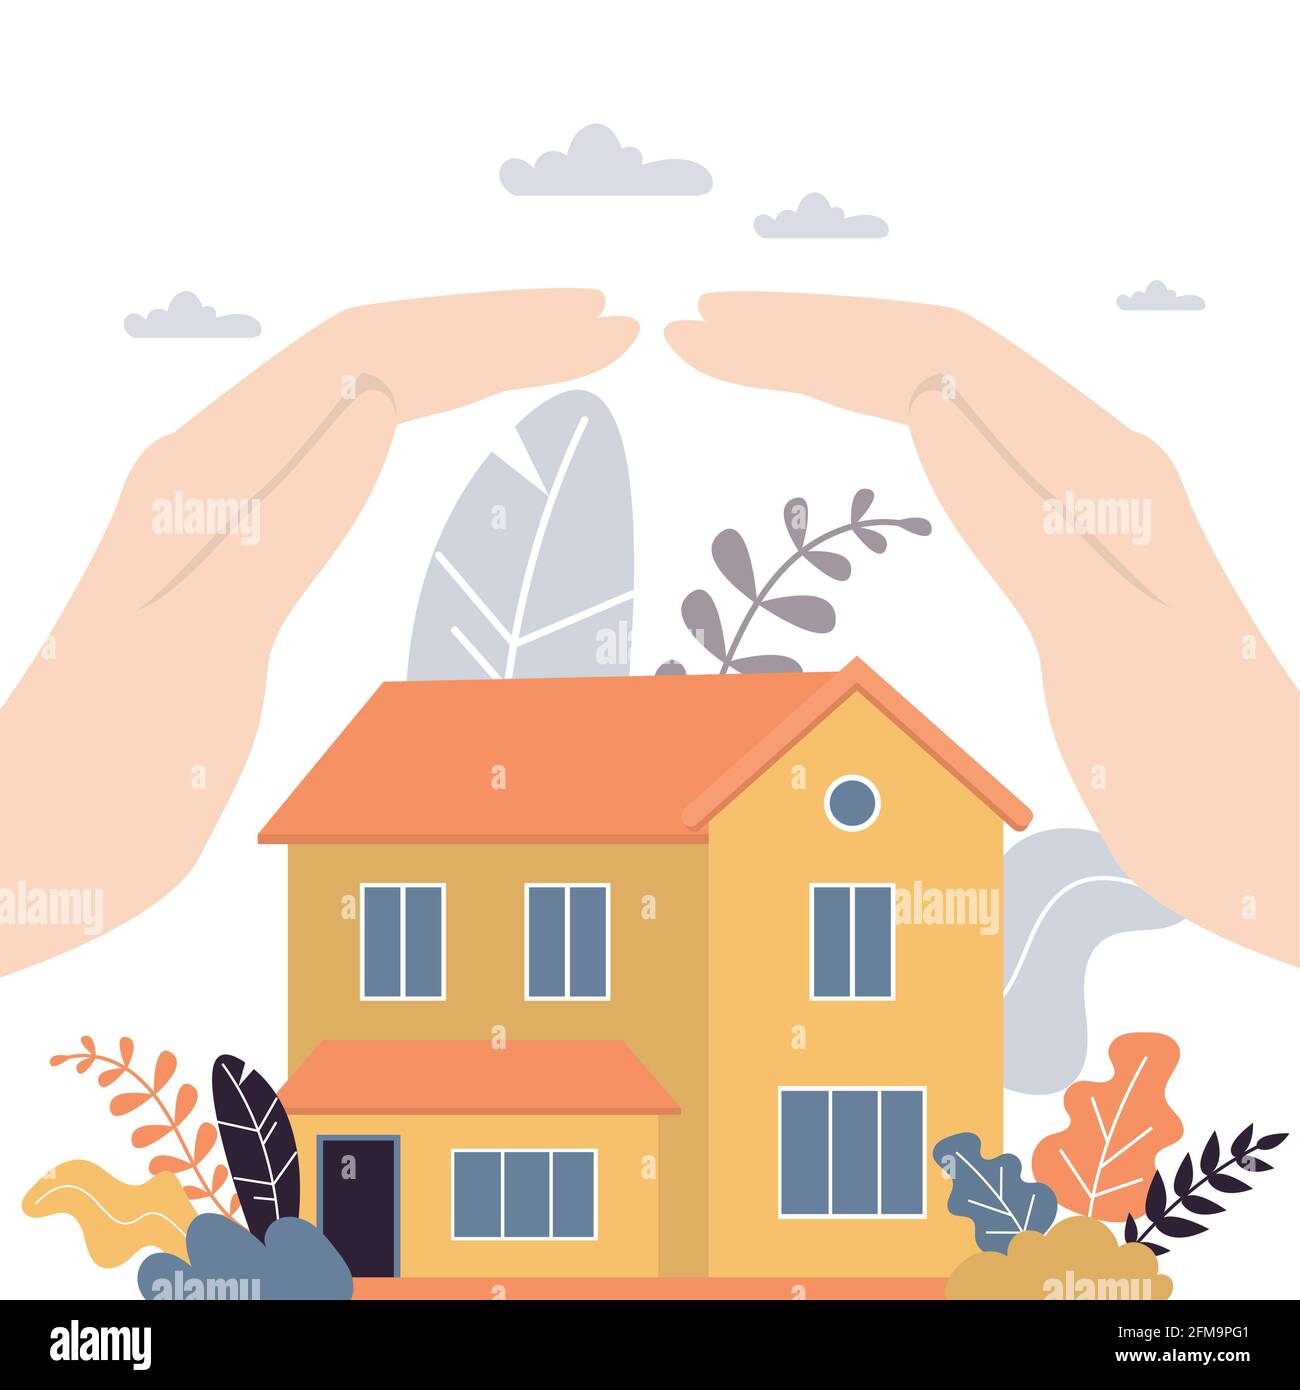 Real estate insurance concept background. Hands of businessman covering house with care. Home security protection banner. Trendy vector illustration Stock Vector